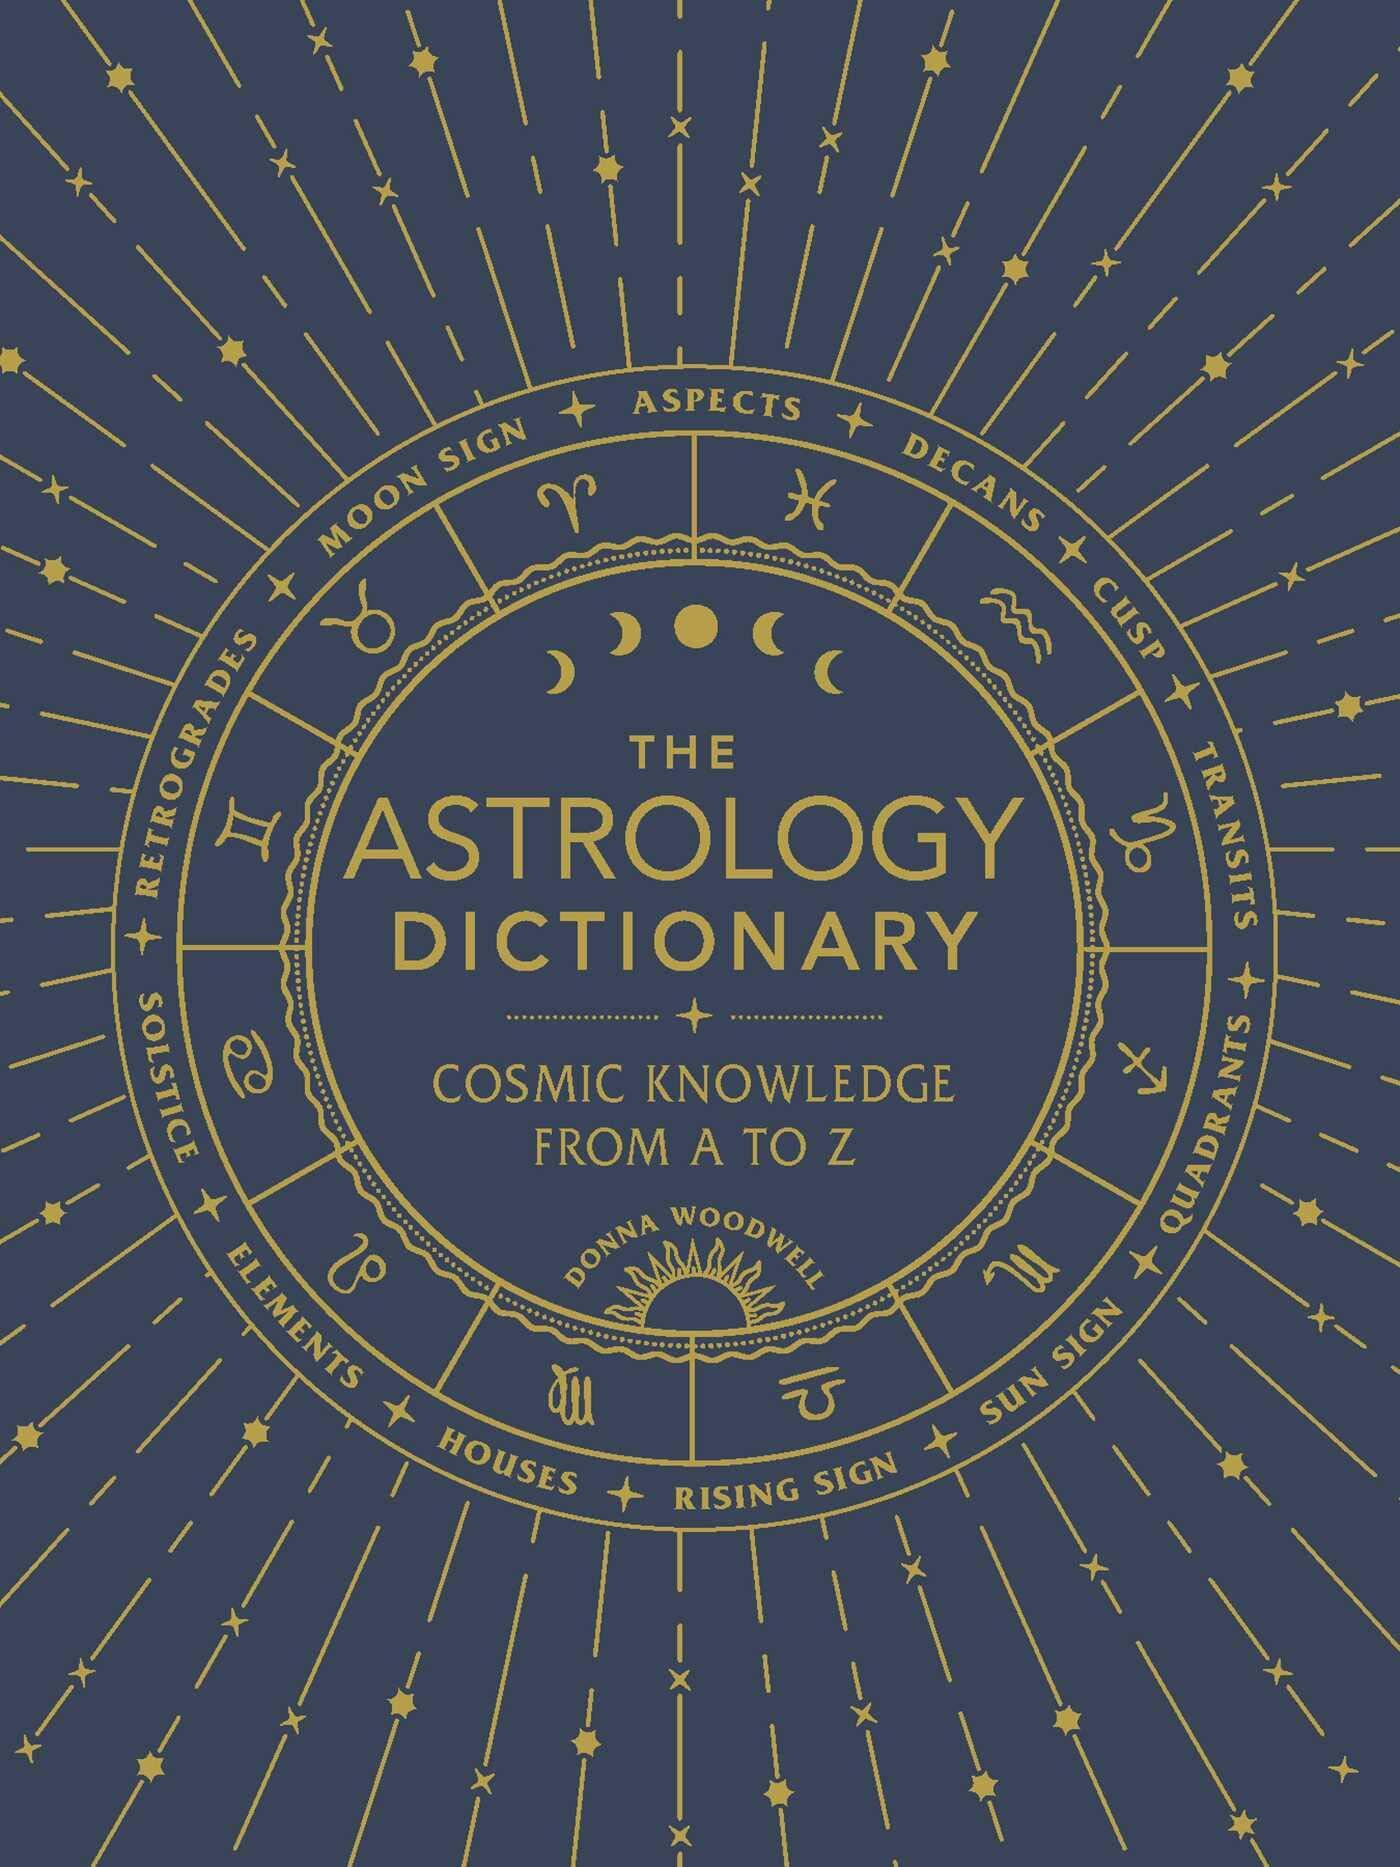 The Astrology Dictionary: Cosmic Knowledge from A to Z Hardcover